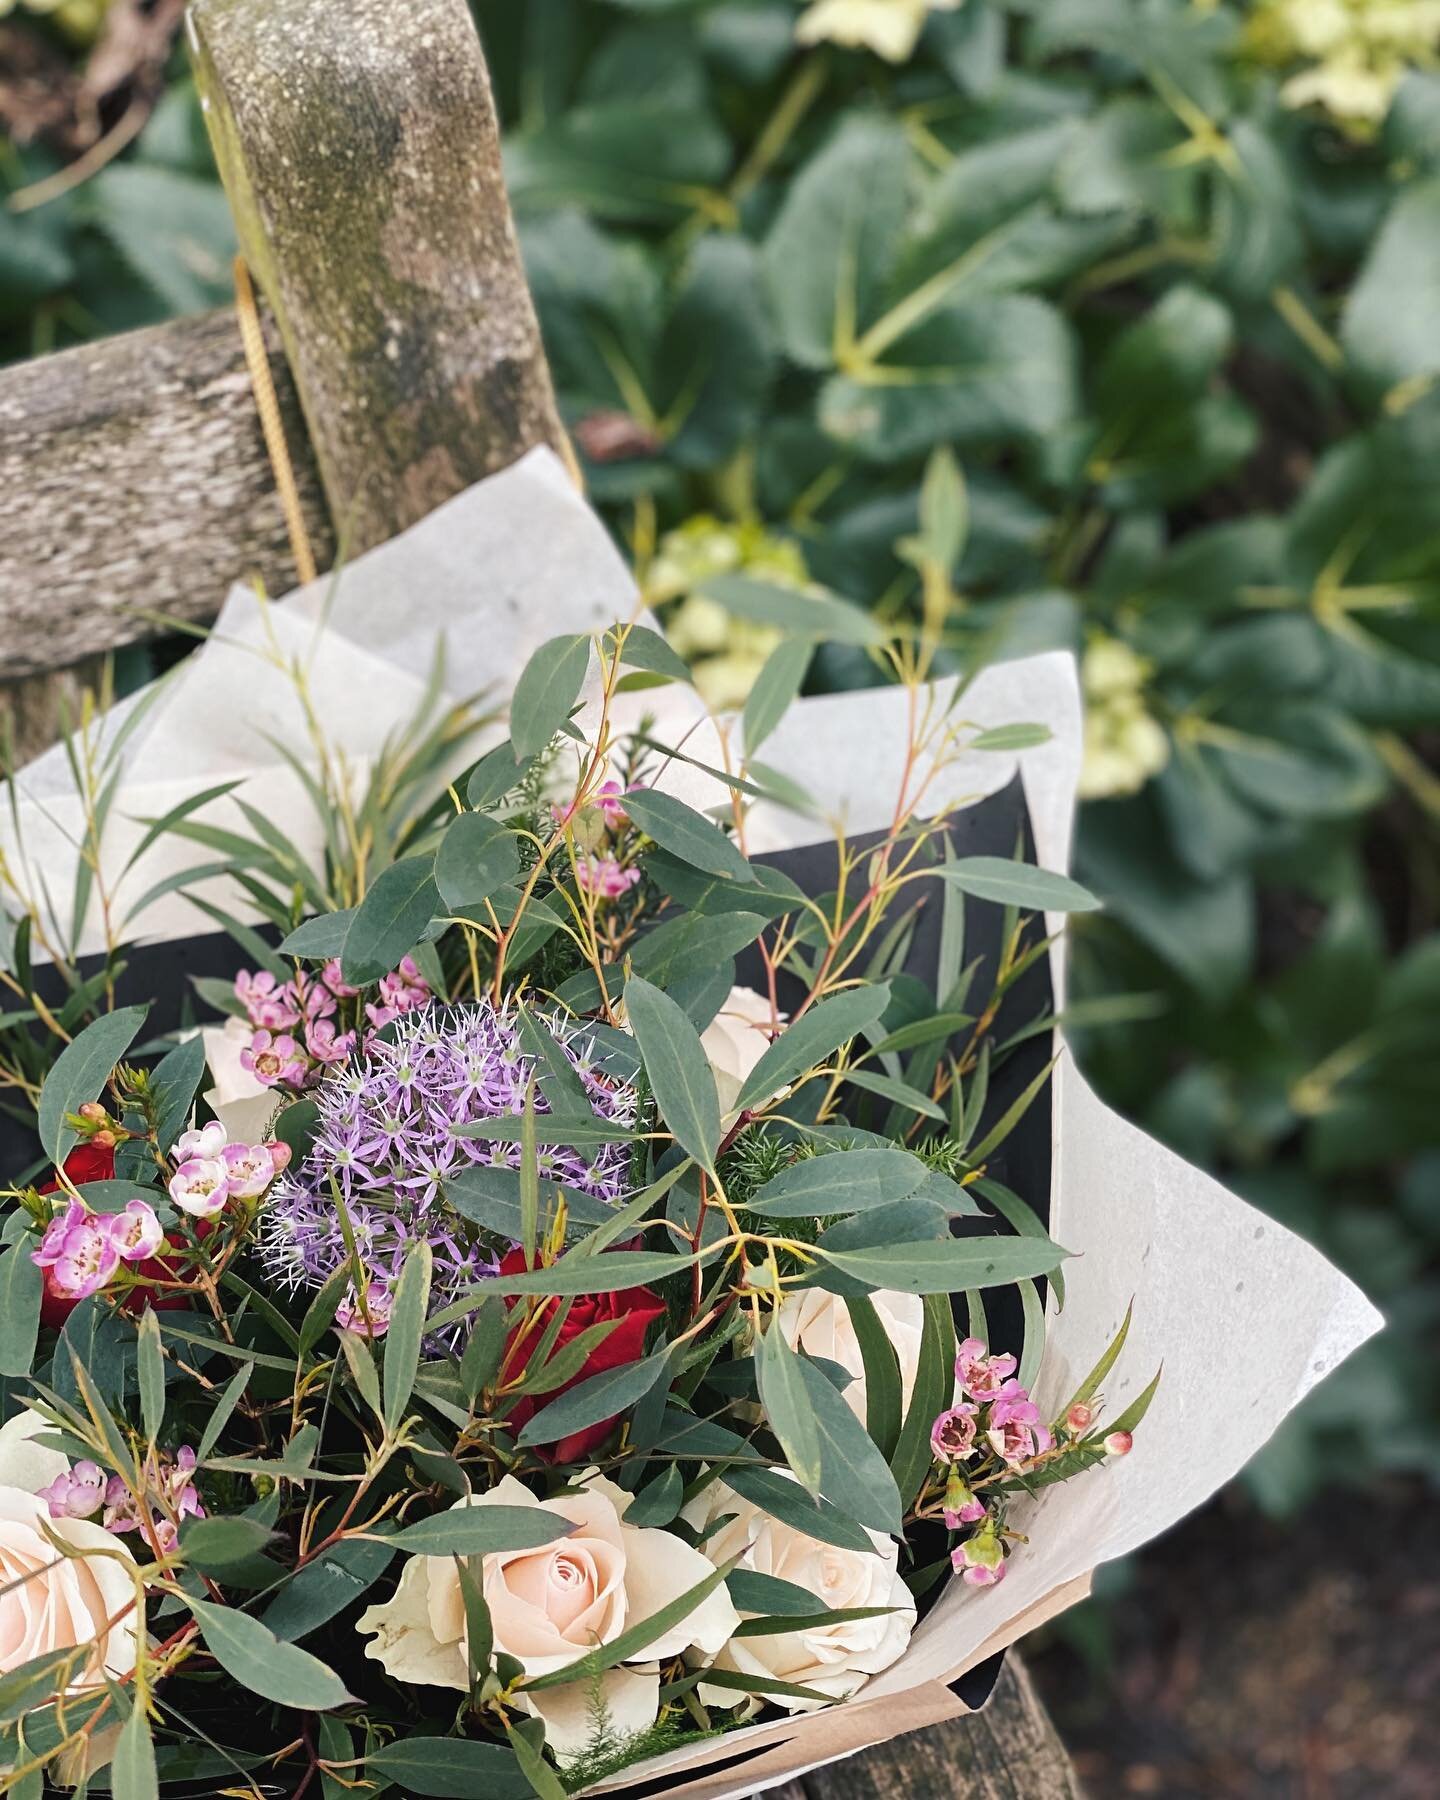 Will you find our &lsquo;Lost in Leamington&rsquo; bouquet? 🤍